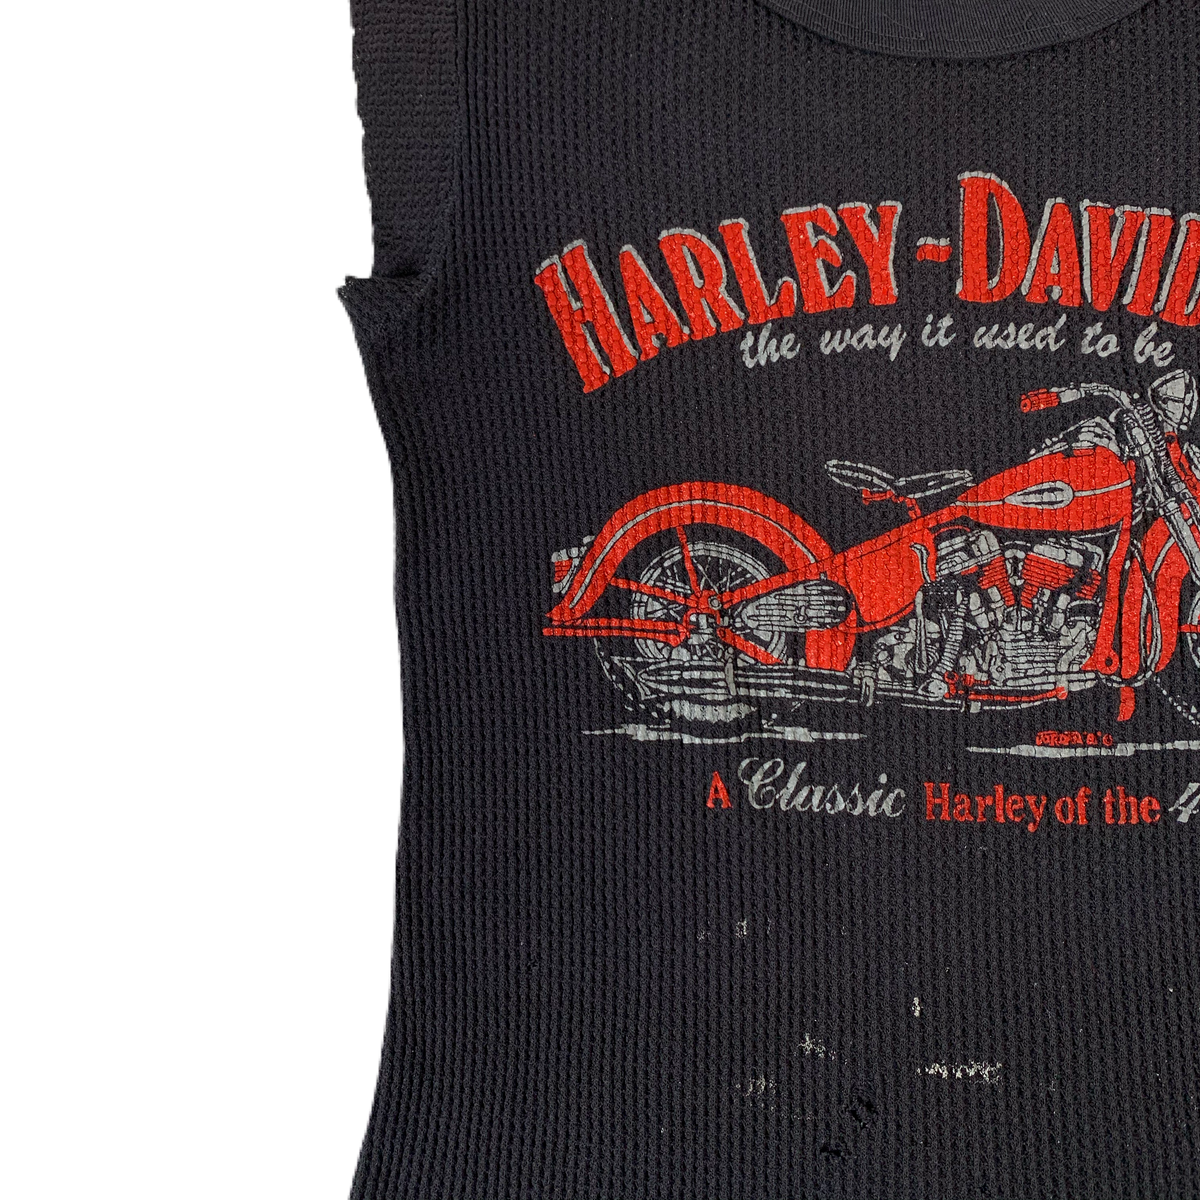 Vintage Harley-Davidson “The Way It Used To Be” Thermal Shirt - jointcustodydc